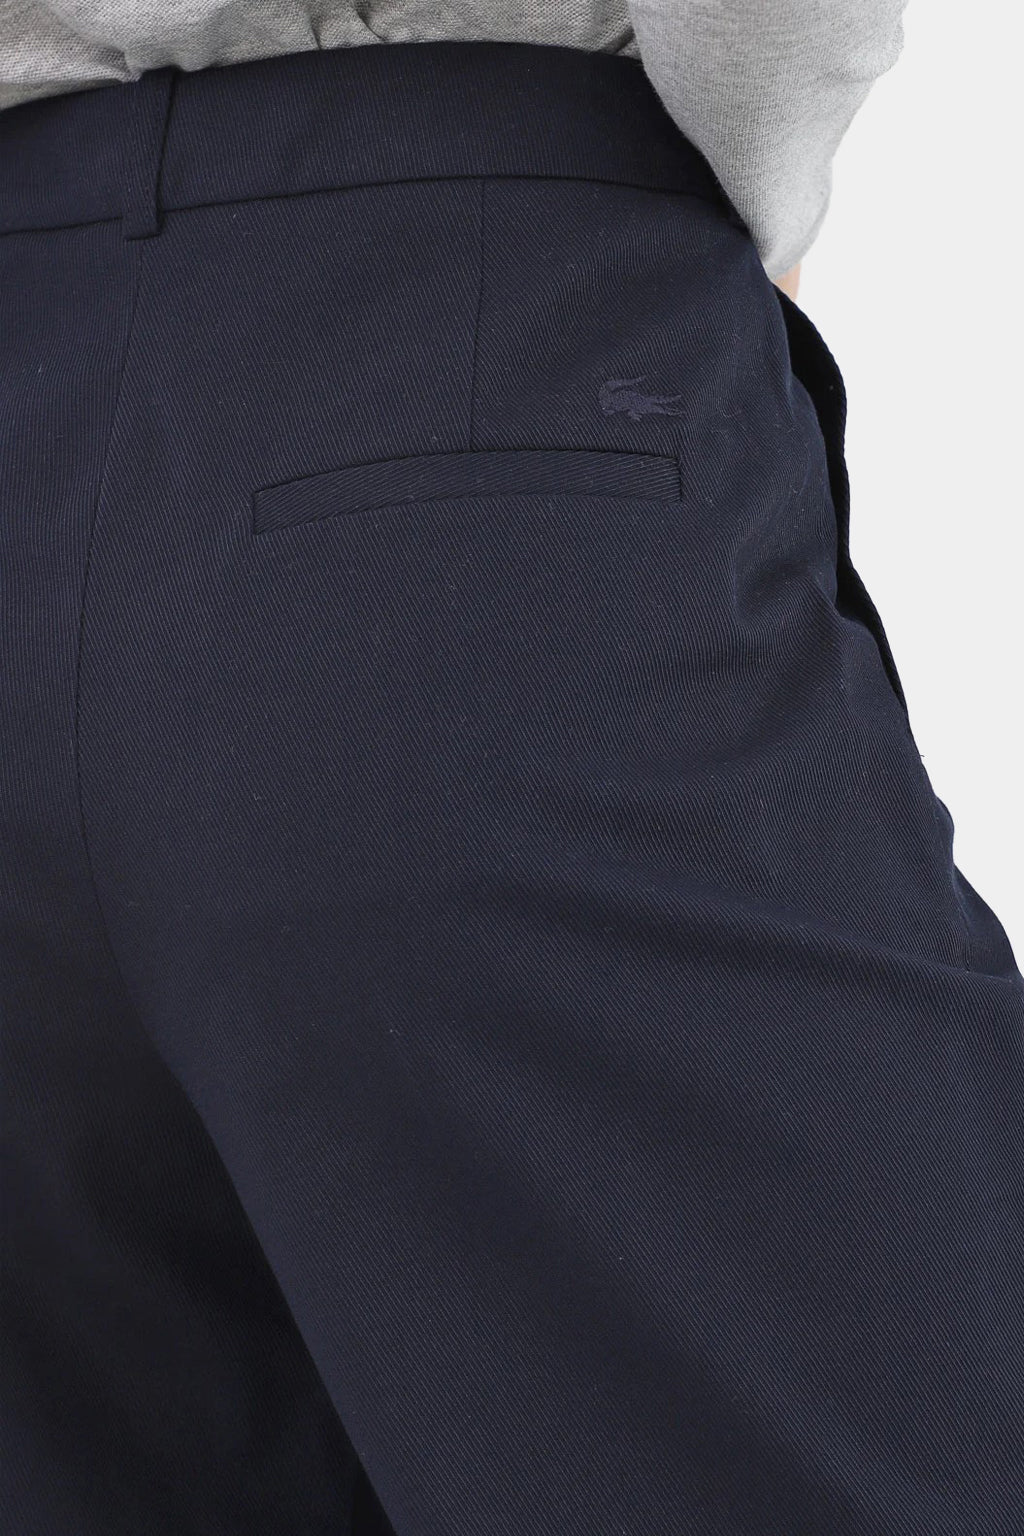 Lacoste - Chino Textured Navy Blue Pants